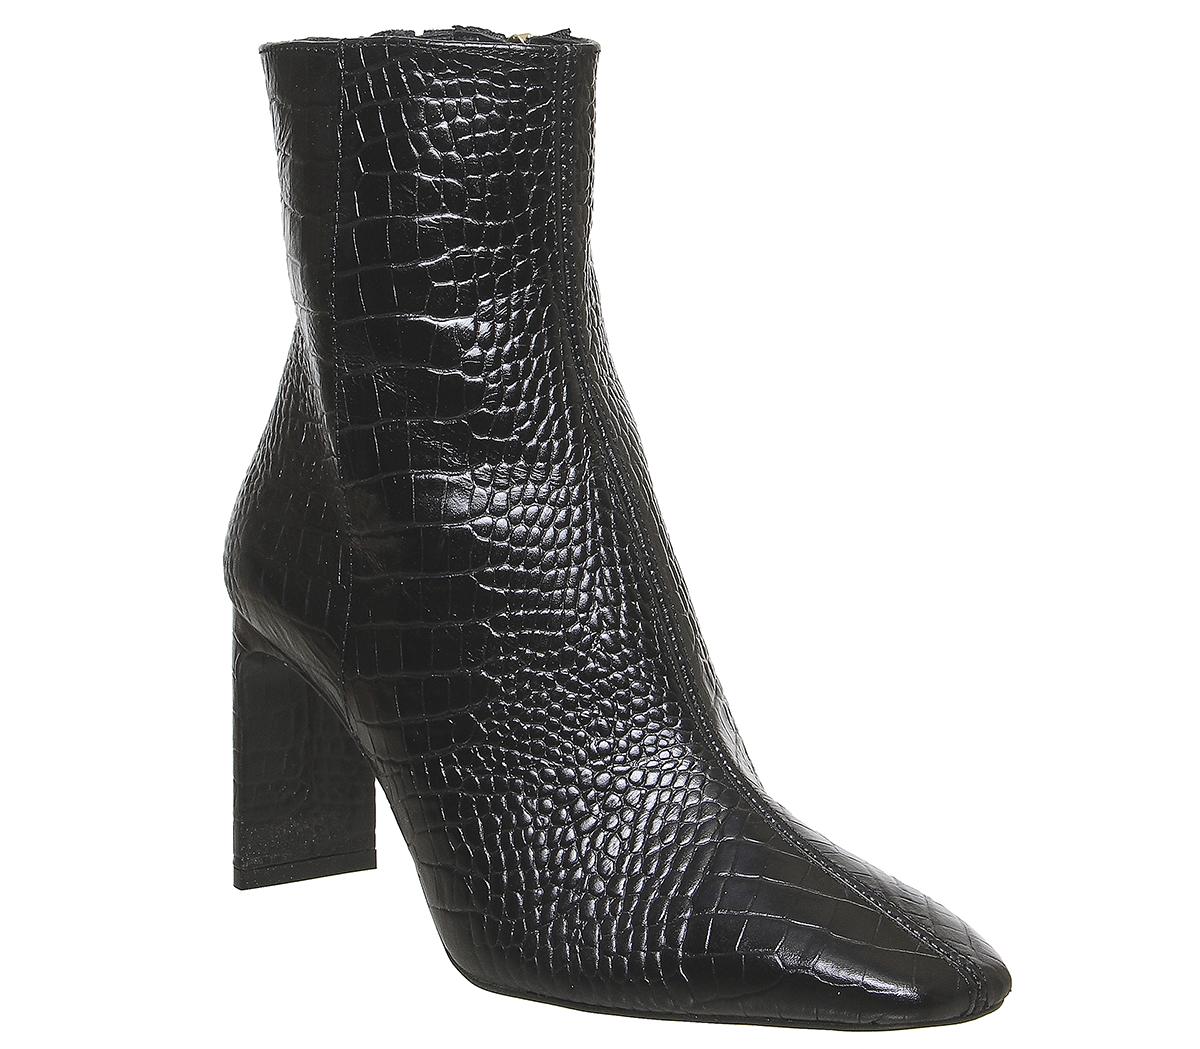 OFFICE Alaya Smart Boots Black Croc Leather - Women's Boots